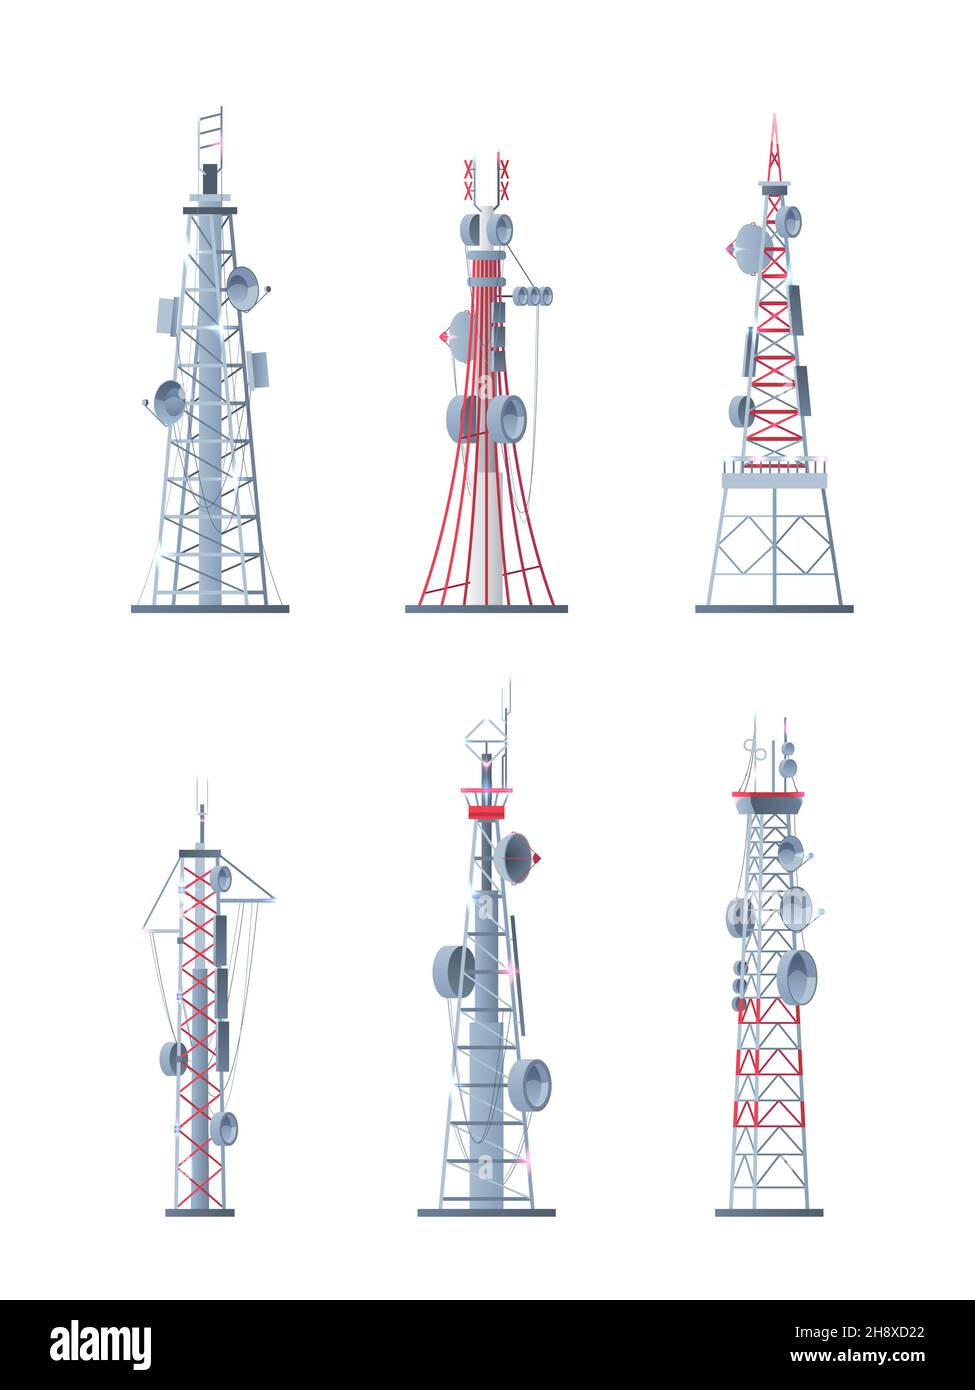 Communication towers. Technological modern network wireless systems telecommunication smart buildings garish vector pictures set isolated Stock Vector